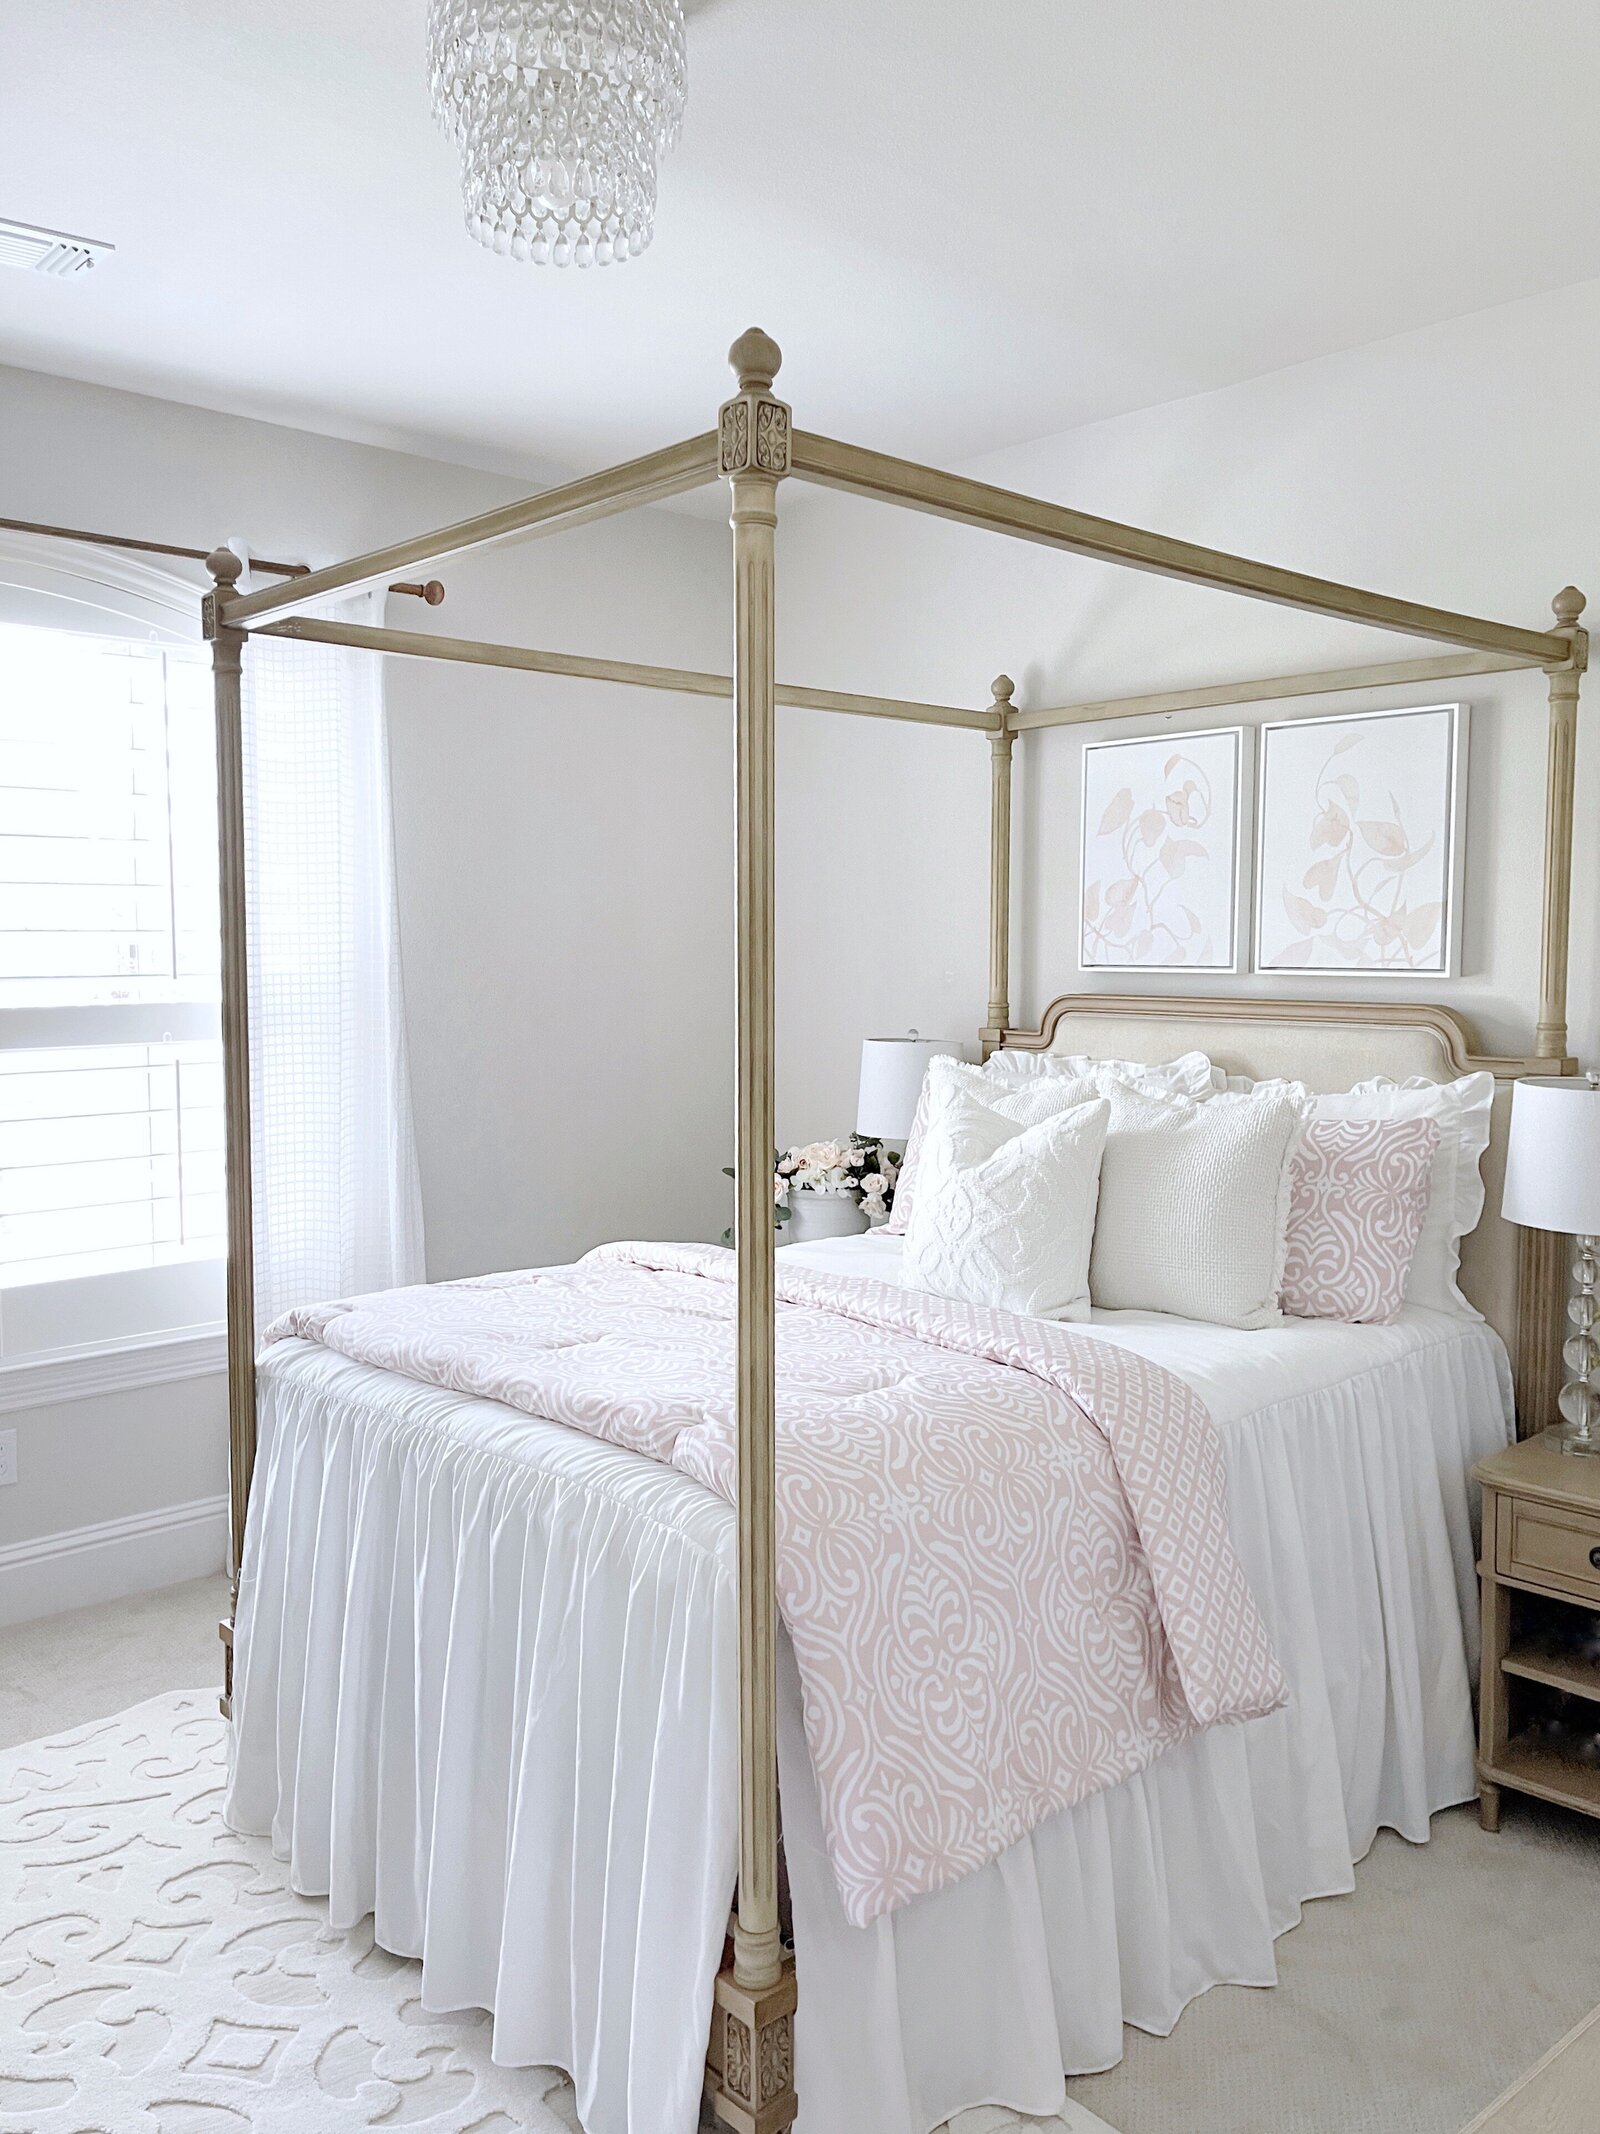 Bedroom space featuring a MTH bedding set on a canopy bed